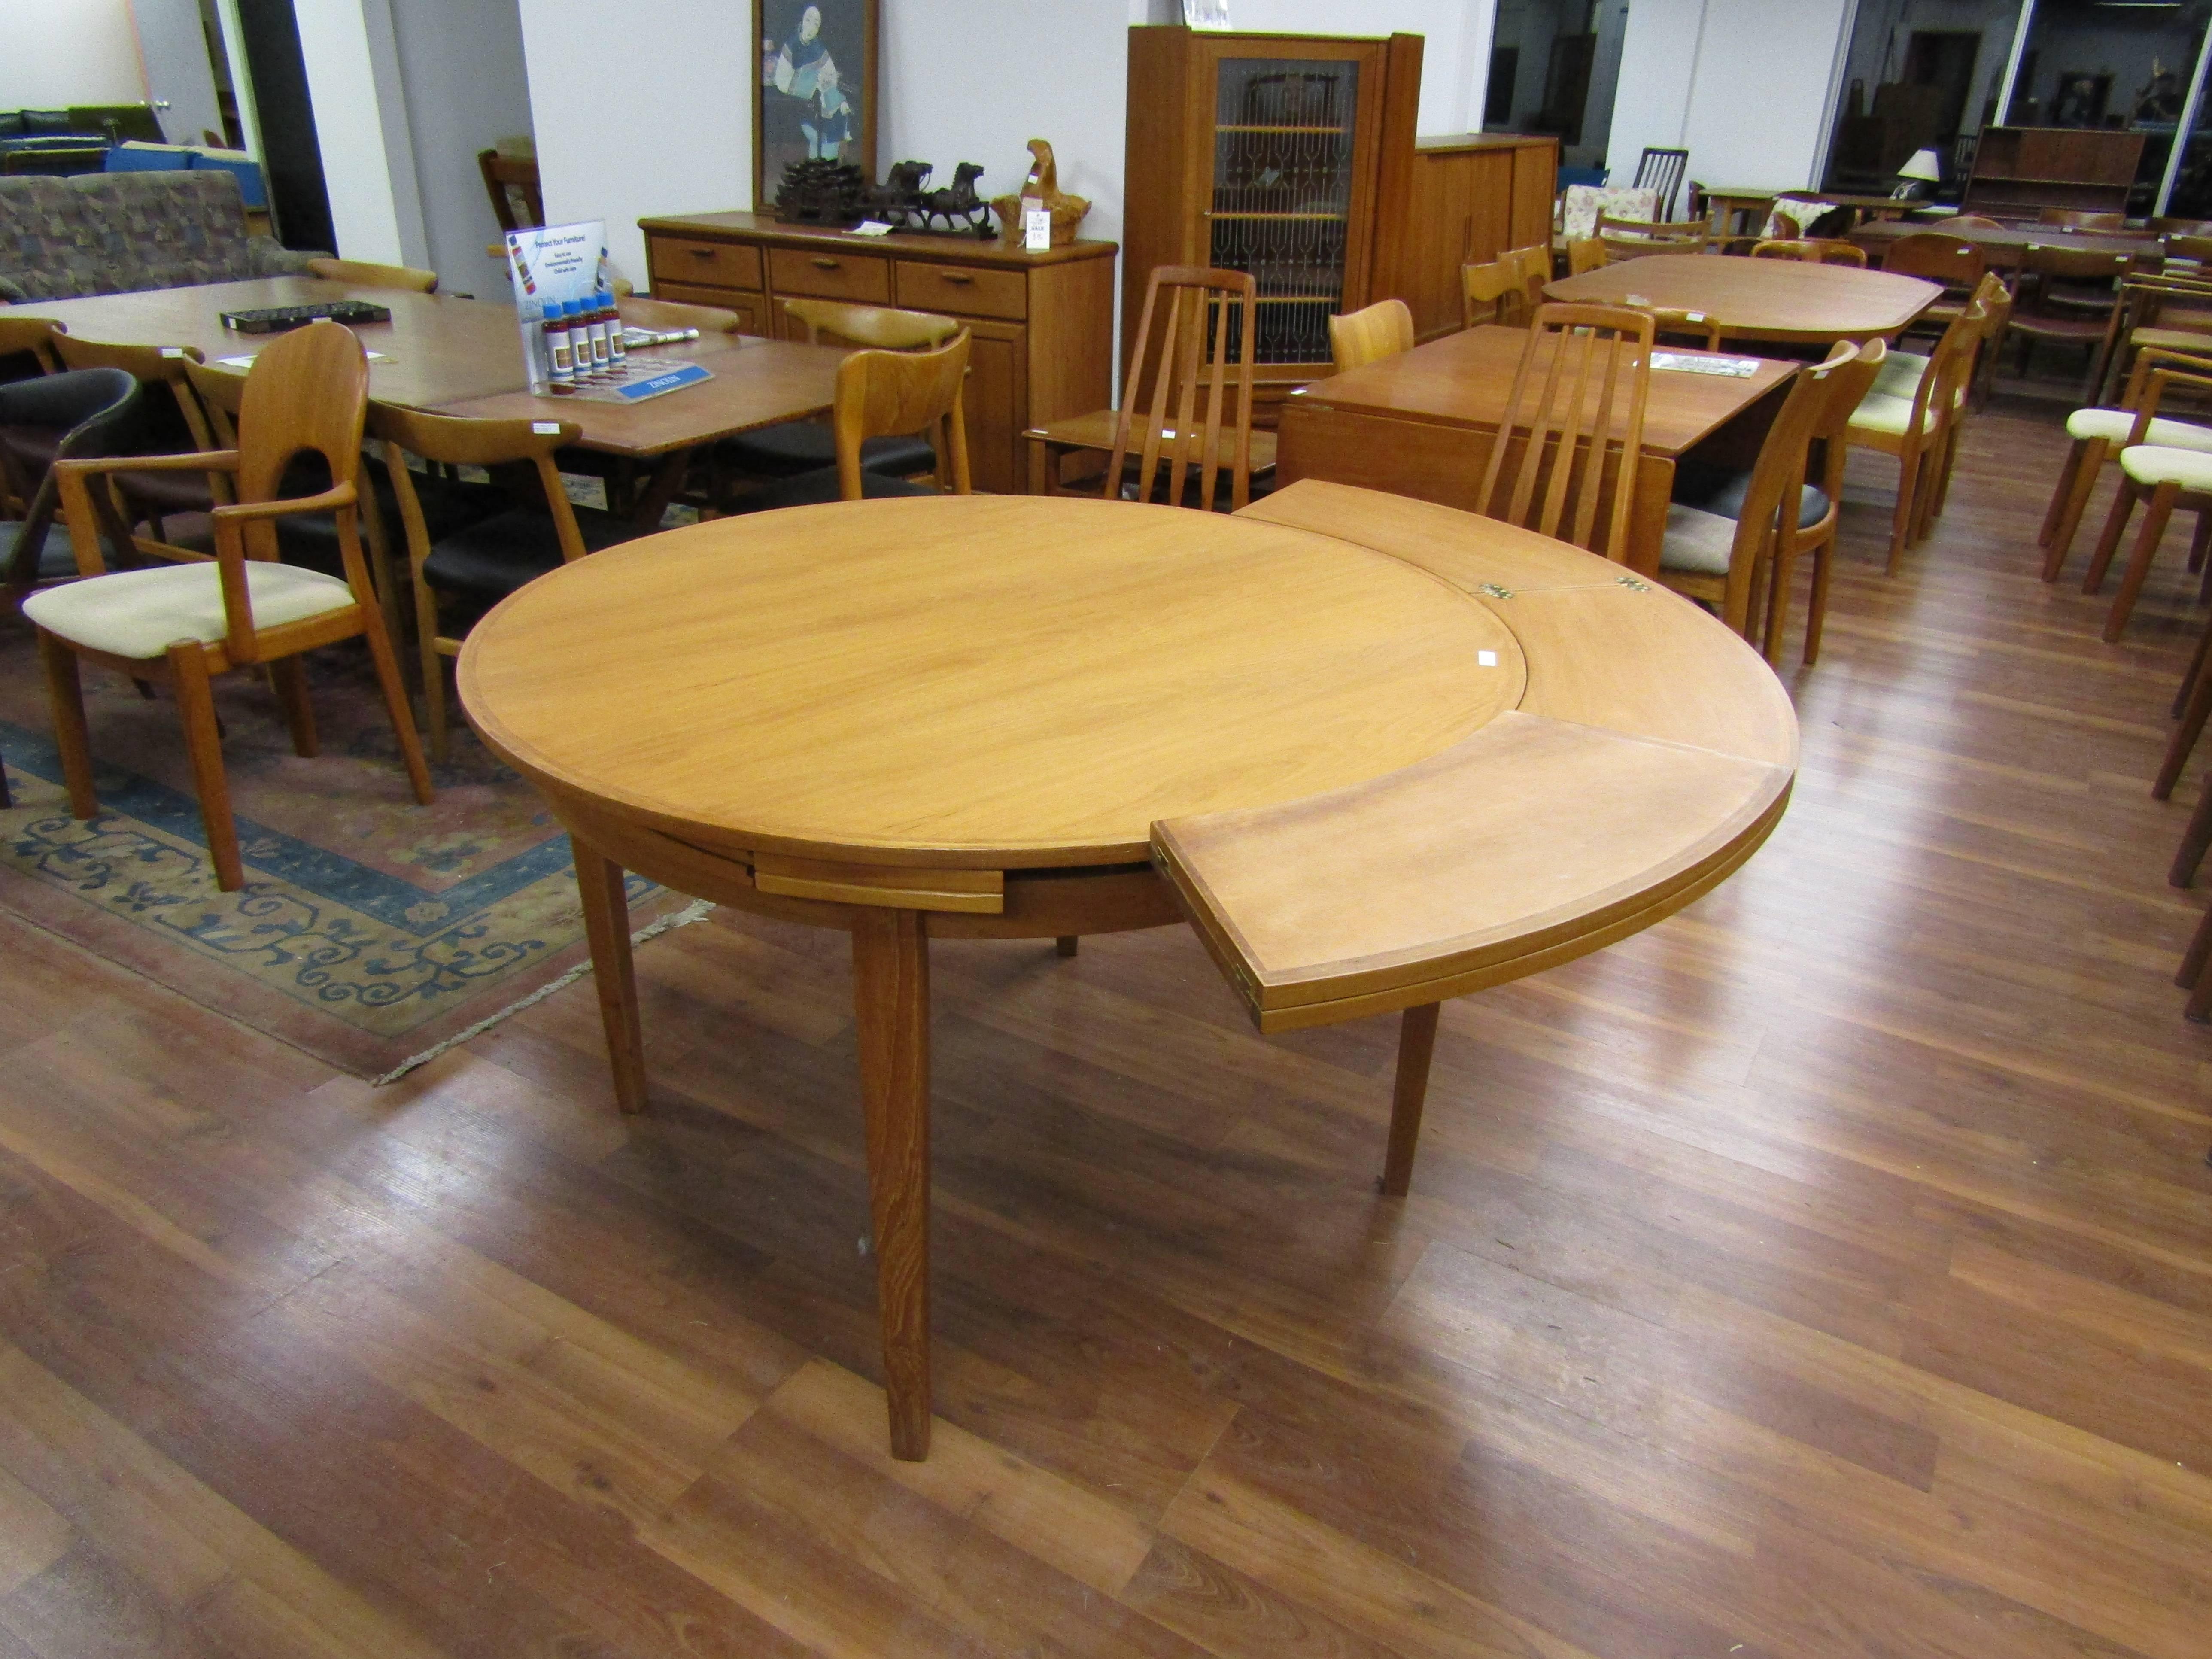 This elegant flip flap and Sophie teak dining table comes from Denmark.
Measure: Leaves hide under the table and extend out 10.75